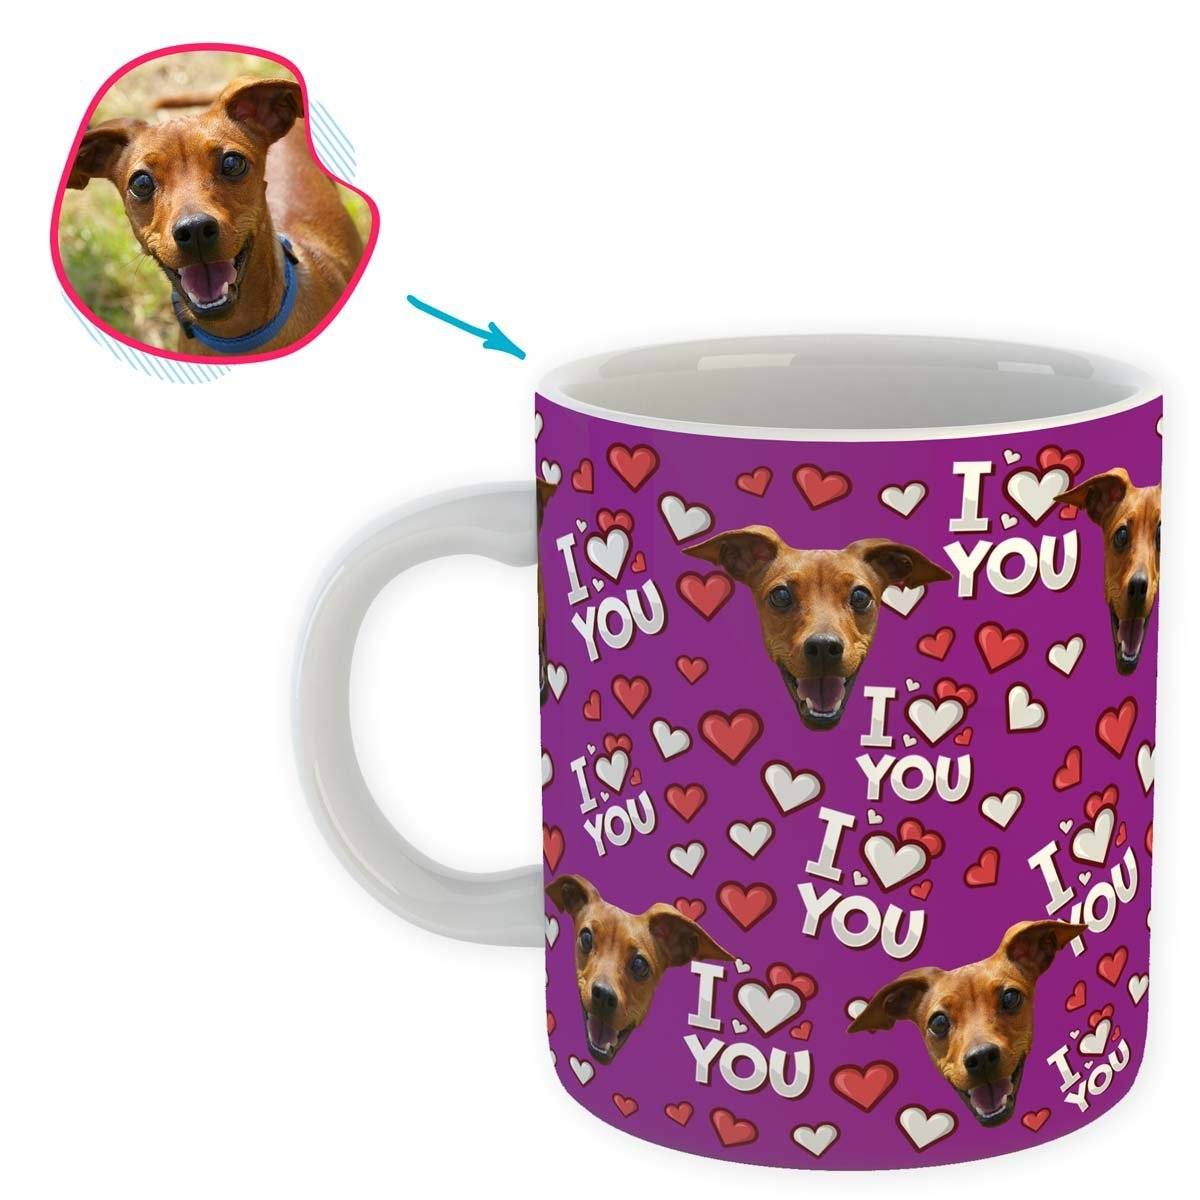 purple I Love You mug personalized with photo of face printed on it